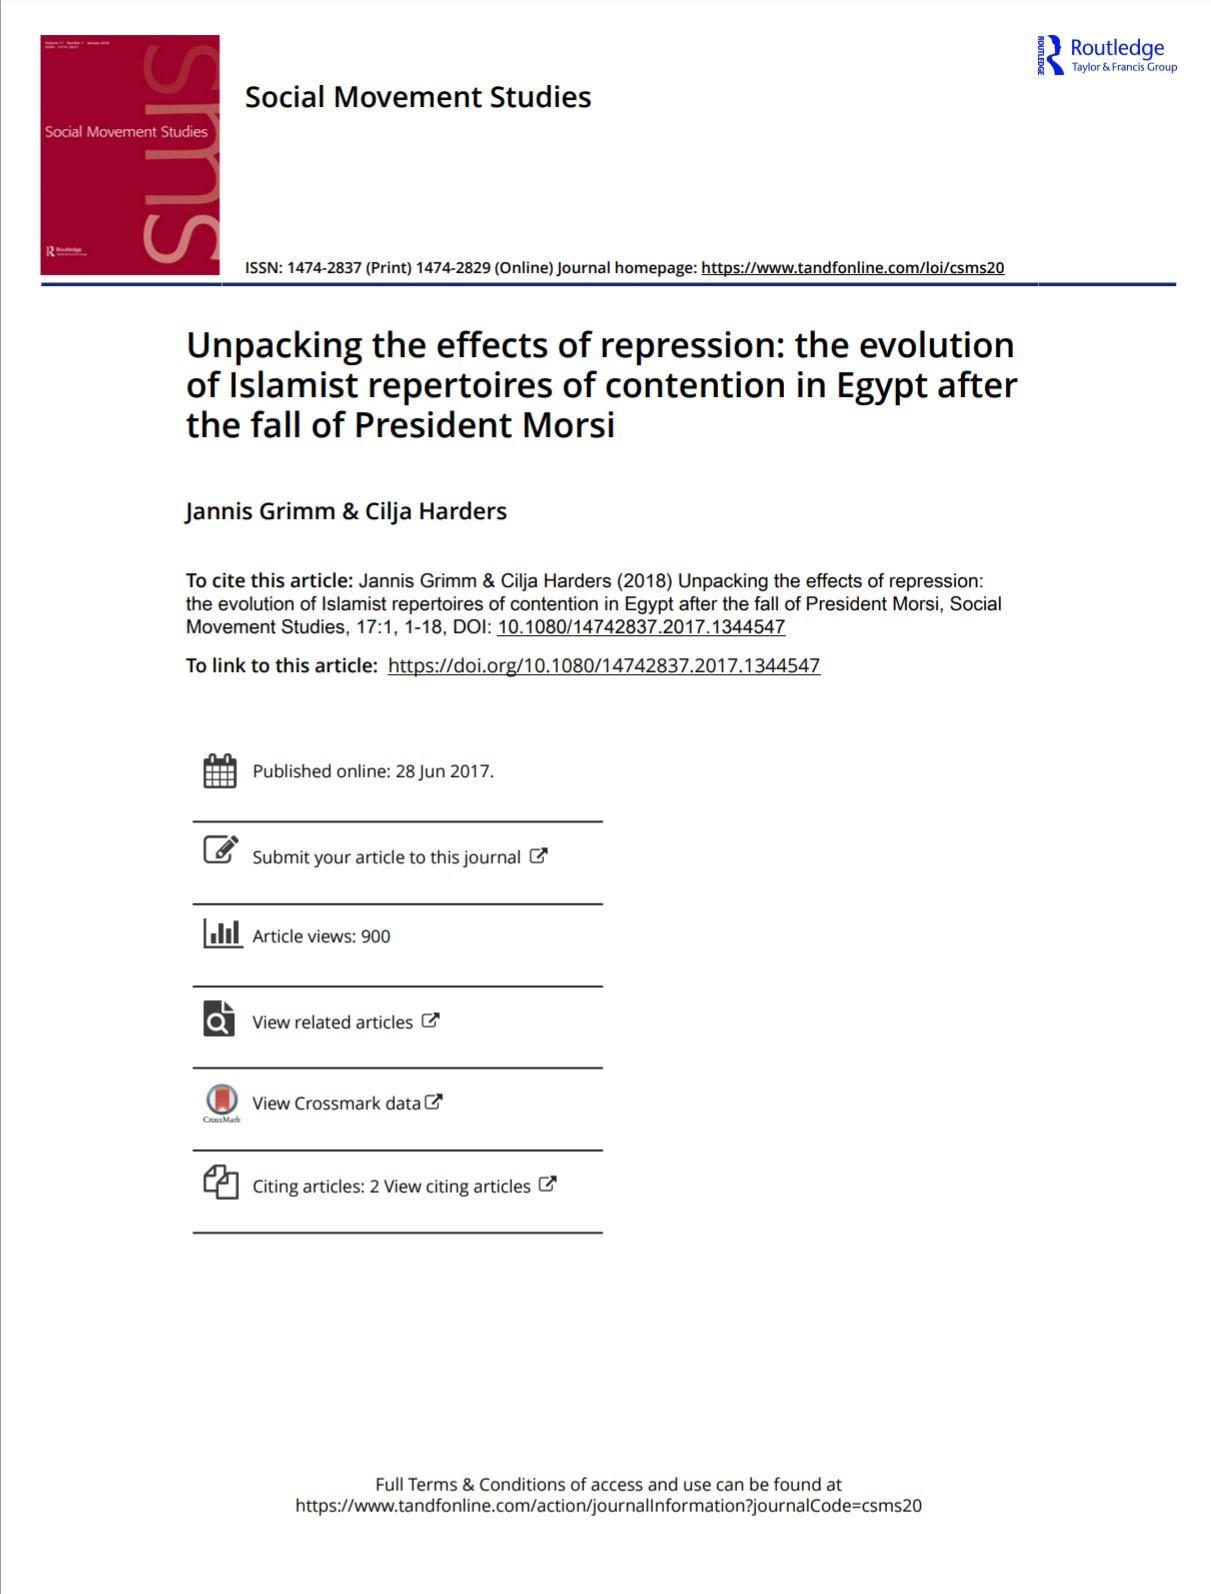 Unpacking the effects of repression. the evolution of Islamist repertoires of contention in Egypt after the fall of President Morsi